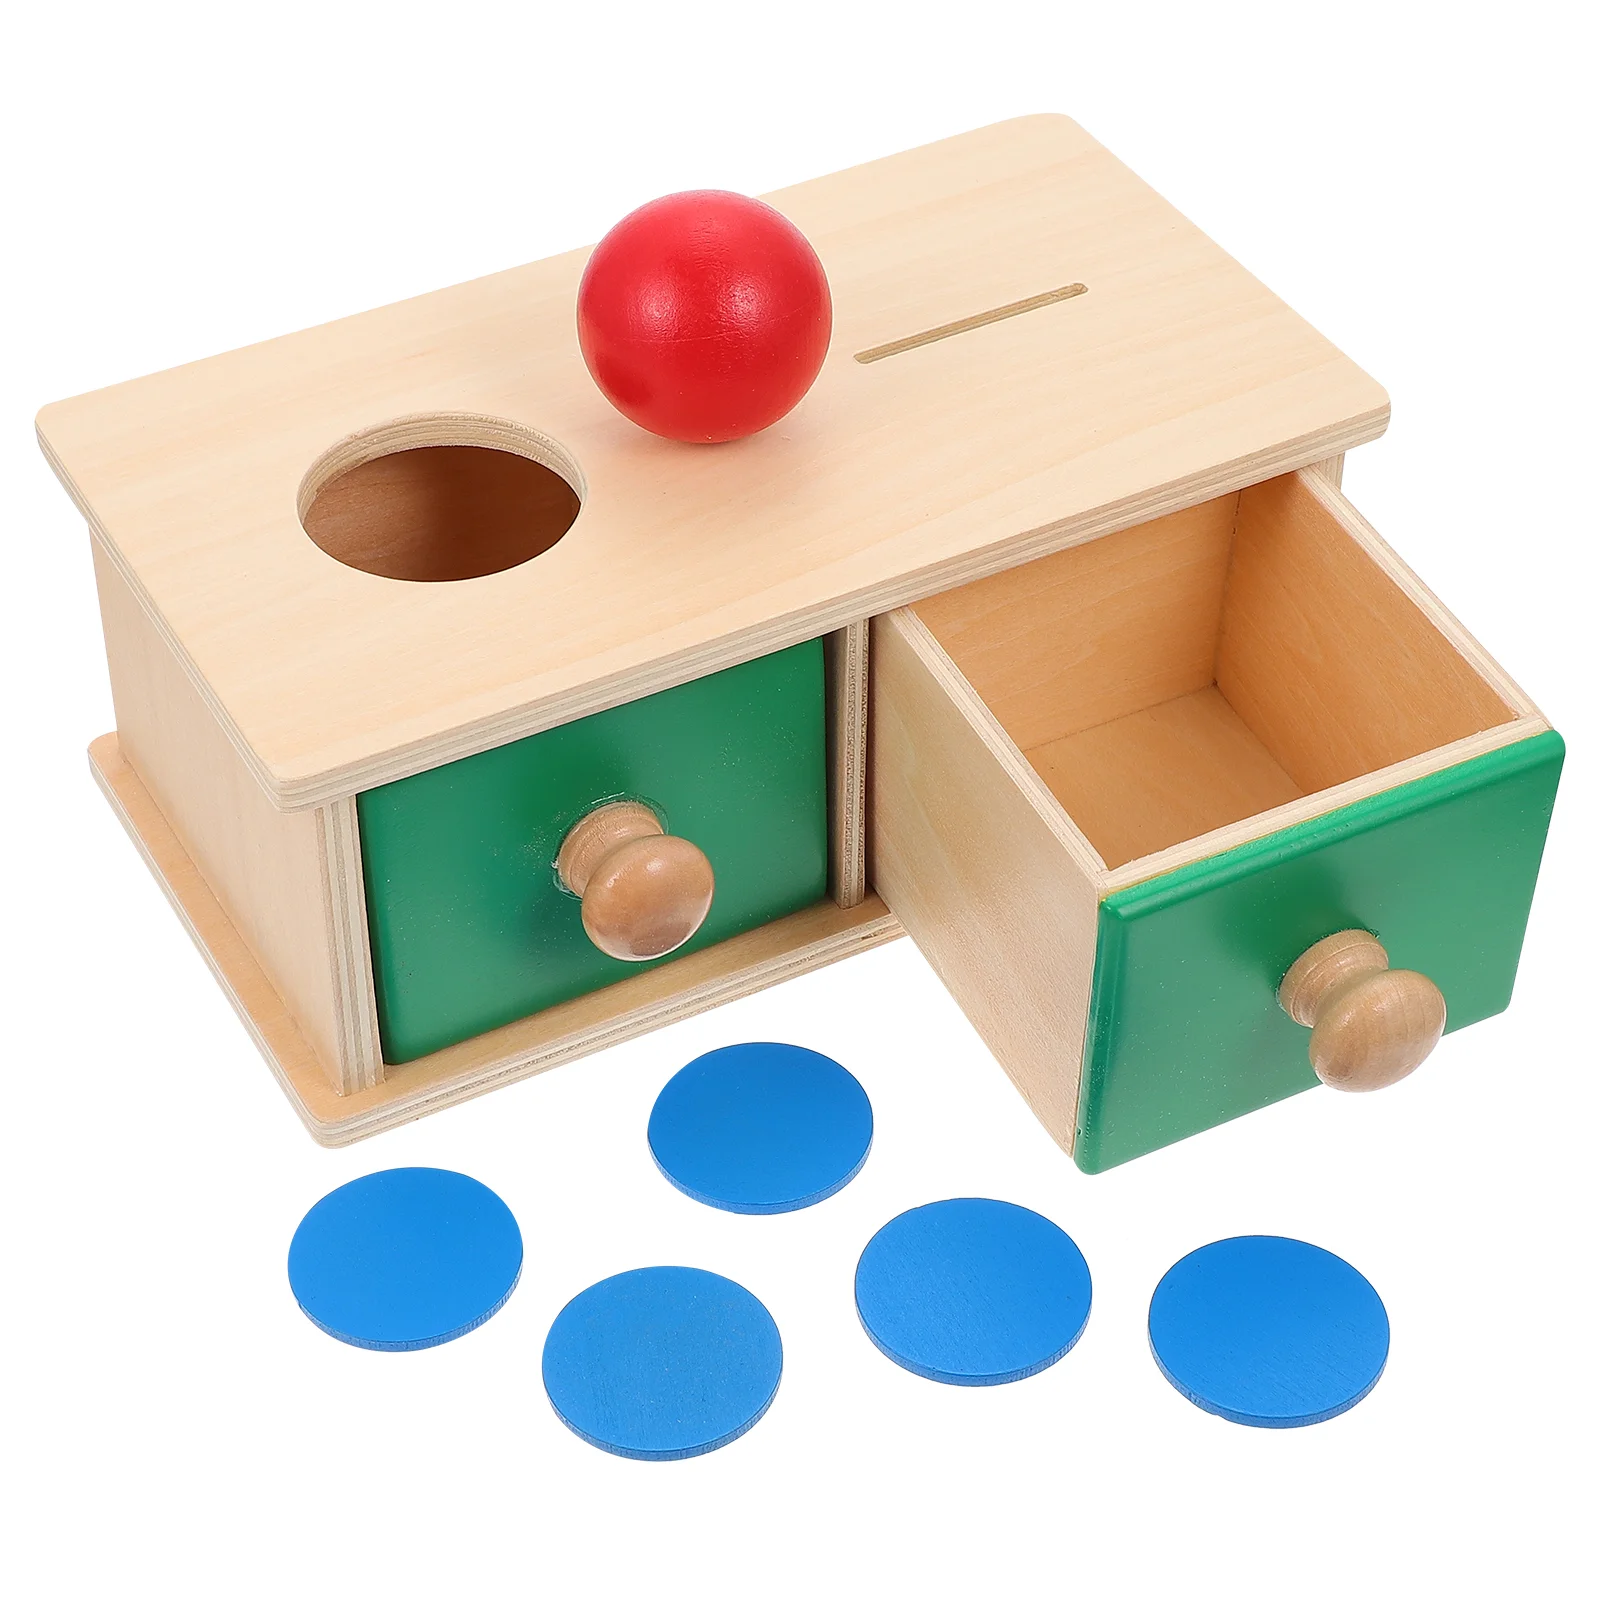 

Drawer Target Box Cognitive Toy Intelligence Interactive Wooden Toys Eye Hand Coordination Plaything Kids Children’s